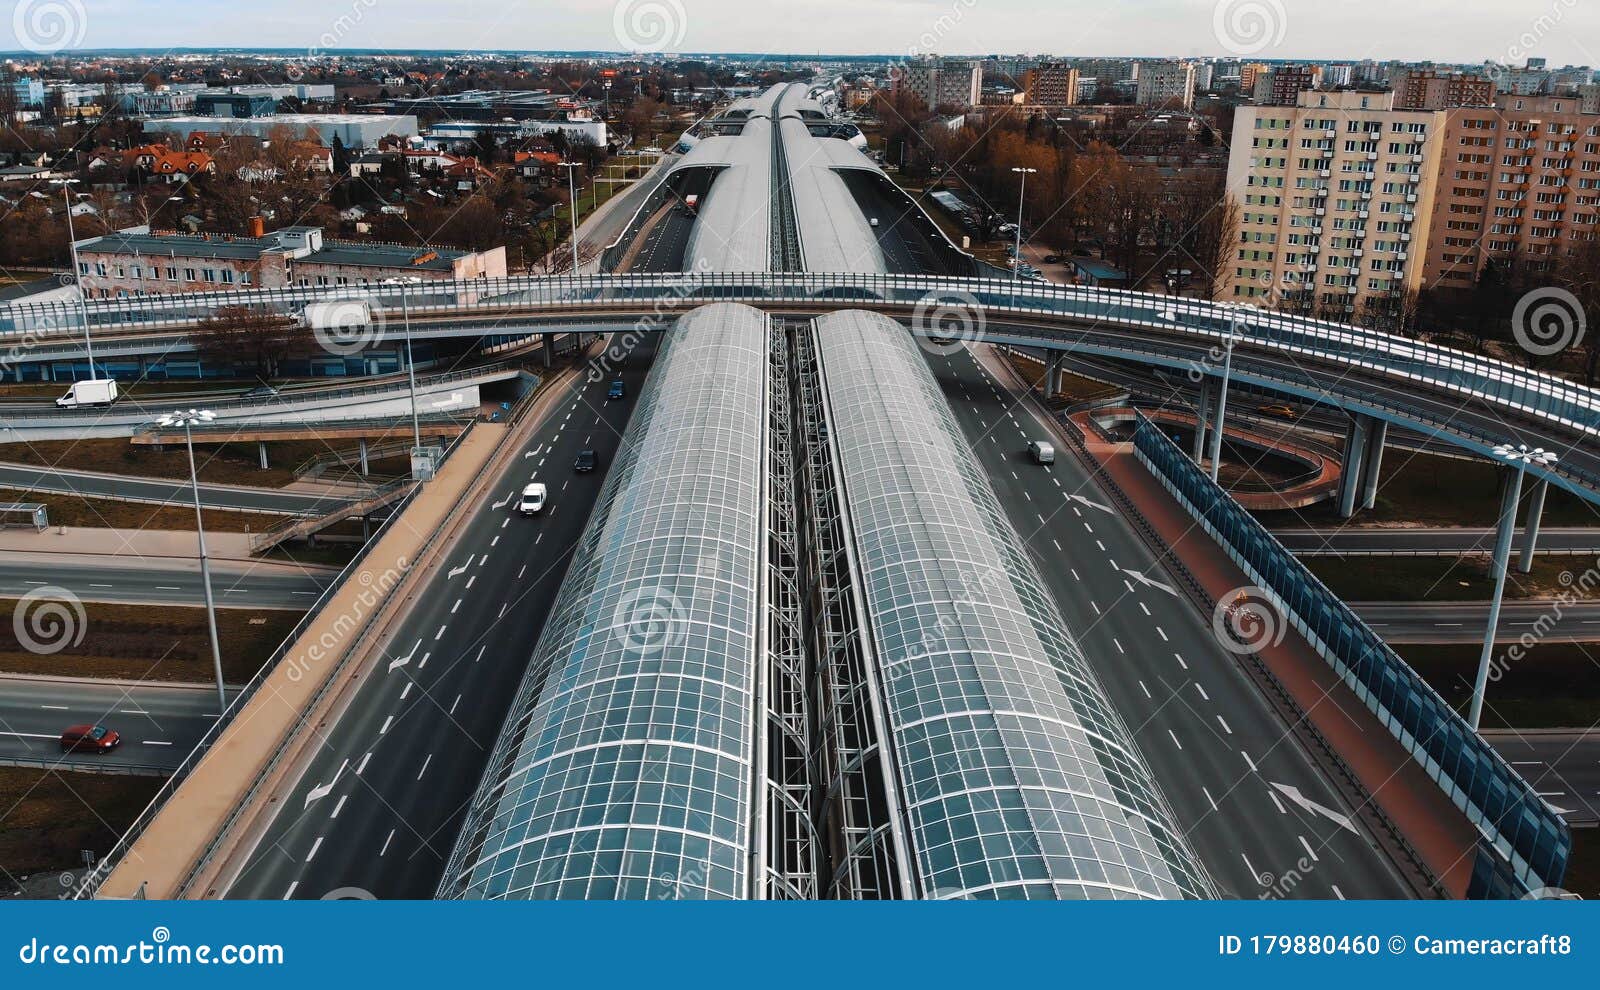 Warsaw, Poland, 03.20.2020. - The anti-noise glass tunnel and overpass Trasa Torunska highway in north-east Warsaw